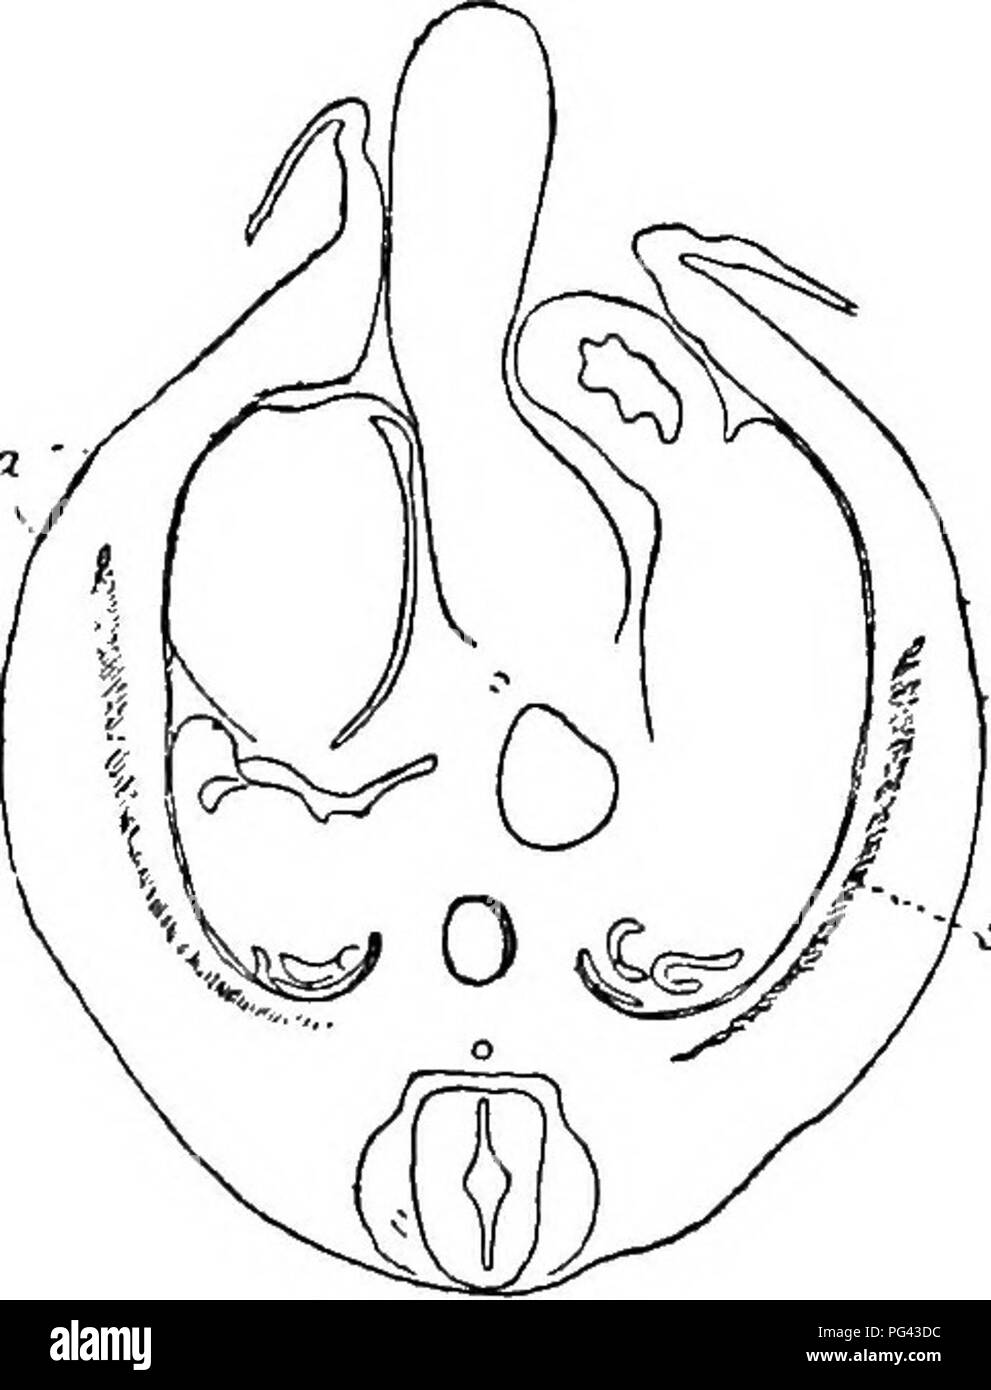 . The mammary apparatus of the mammalia : in the light of ontogenesis and phylogenesis . Mammals; Mammary glands. DEVELOPMENT IN MAESUPIALIA 57 perhaps six days old. Upon examining the sections of the region of the trunk, which probably contained the primordia of the mam- mary apparatus, I at once saw that here exactly the same primary-primordia were present as. Fig. 19b.—Transverse Section of Six-Days-Old Embryo of &quot;Didelphys maksupialis.&quot; ma, Primary-primordia of mammary apparatus; sm, primordium o( trunk musculature. exist in Echidna—viz., little circumscribed areas of the abdomin Stock Photo